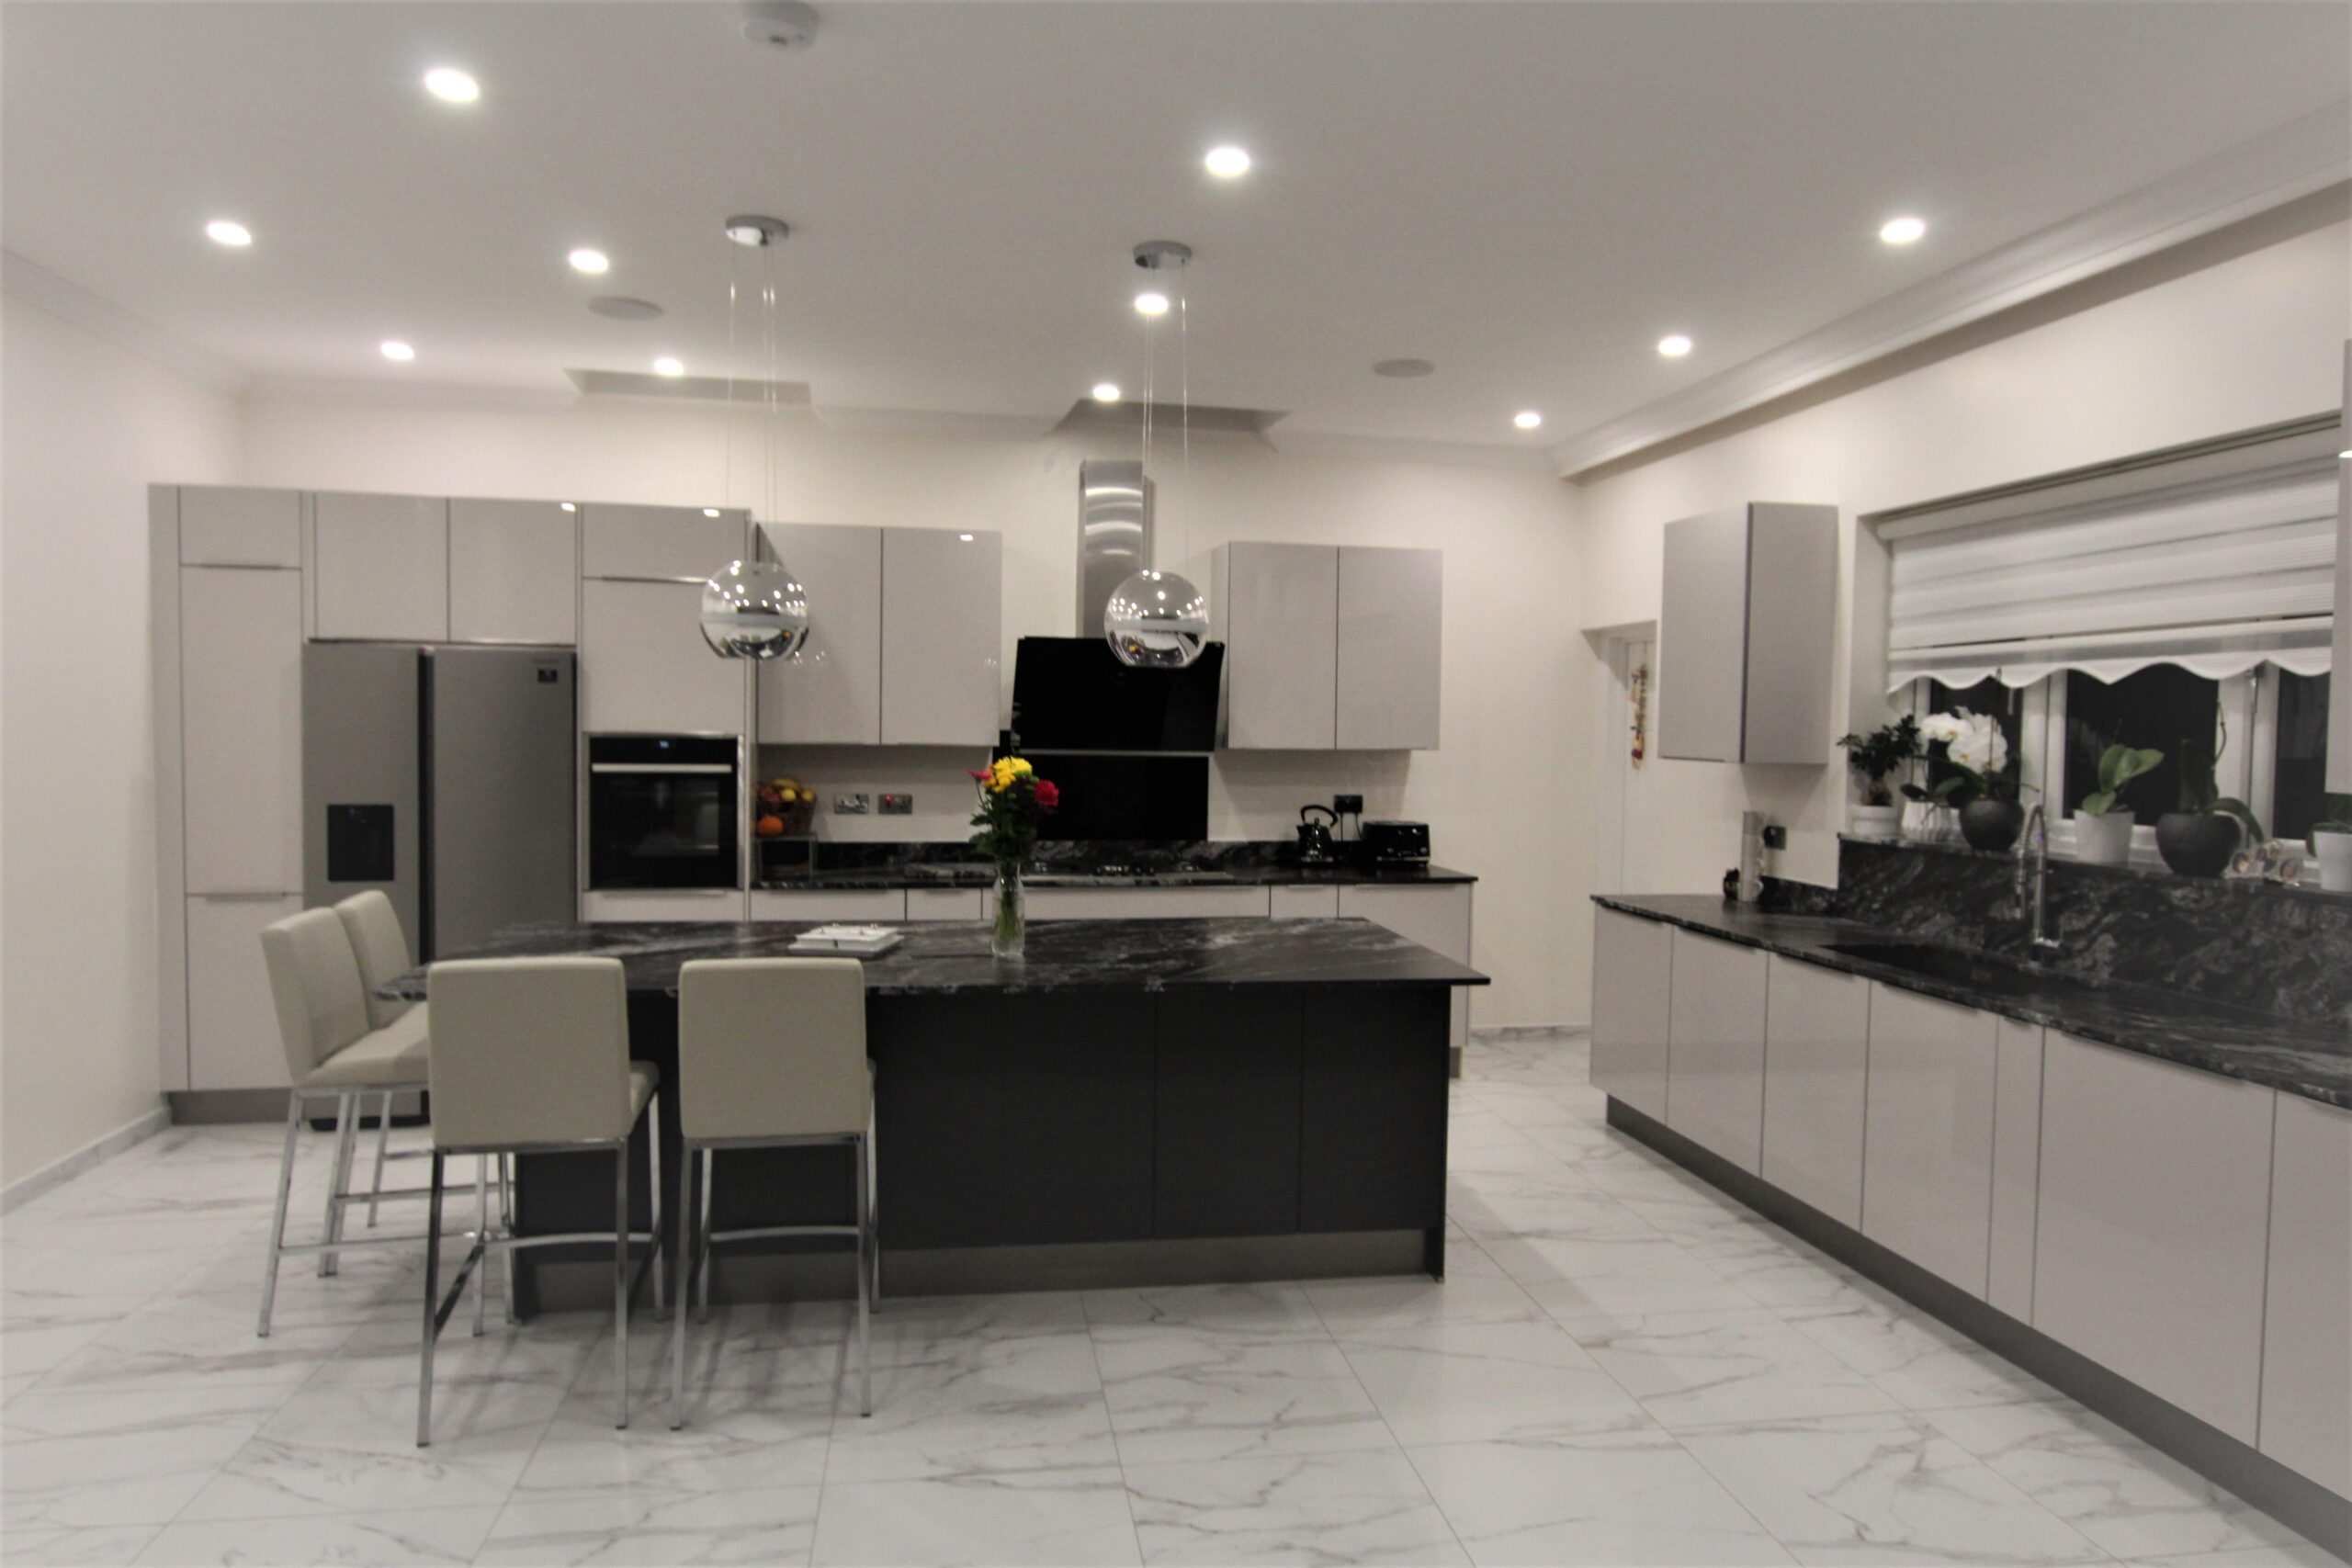 German-made modern kitchen In Winchmore hill from Hampdens KB